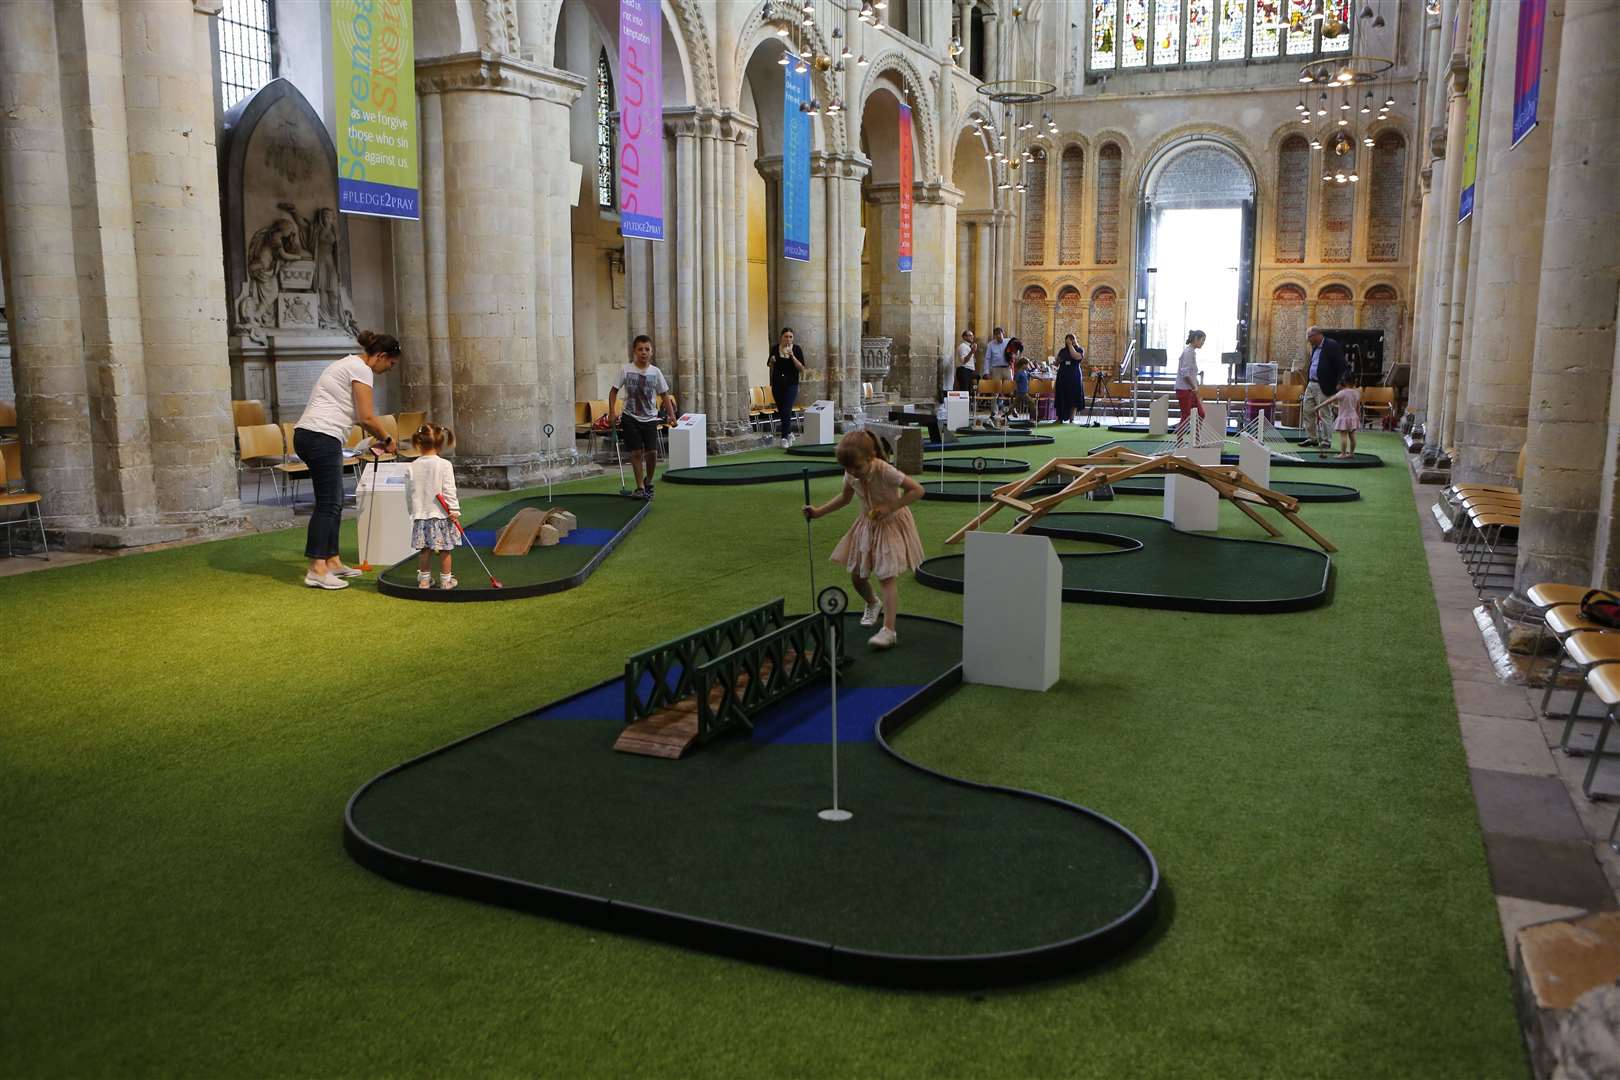 Rochester Cathedral crazy golf course has angered some church-goers